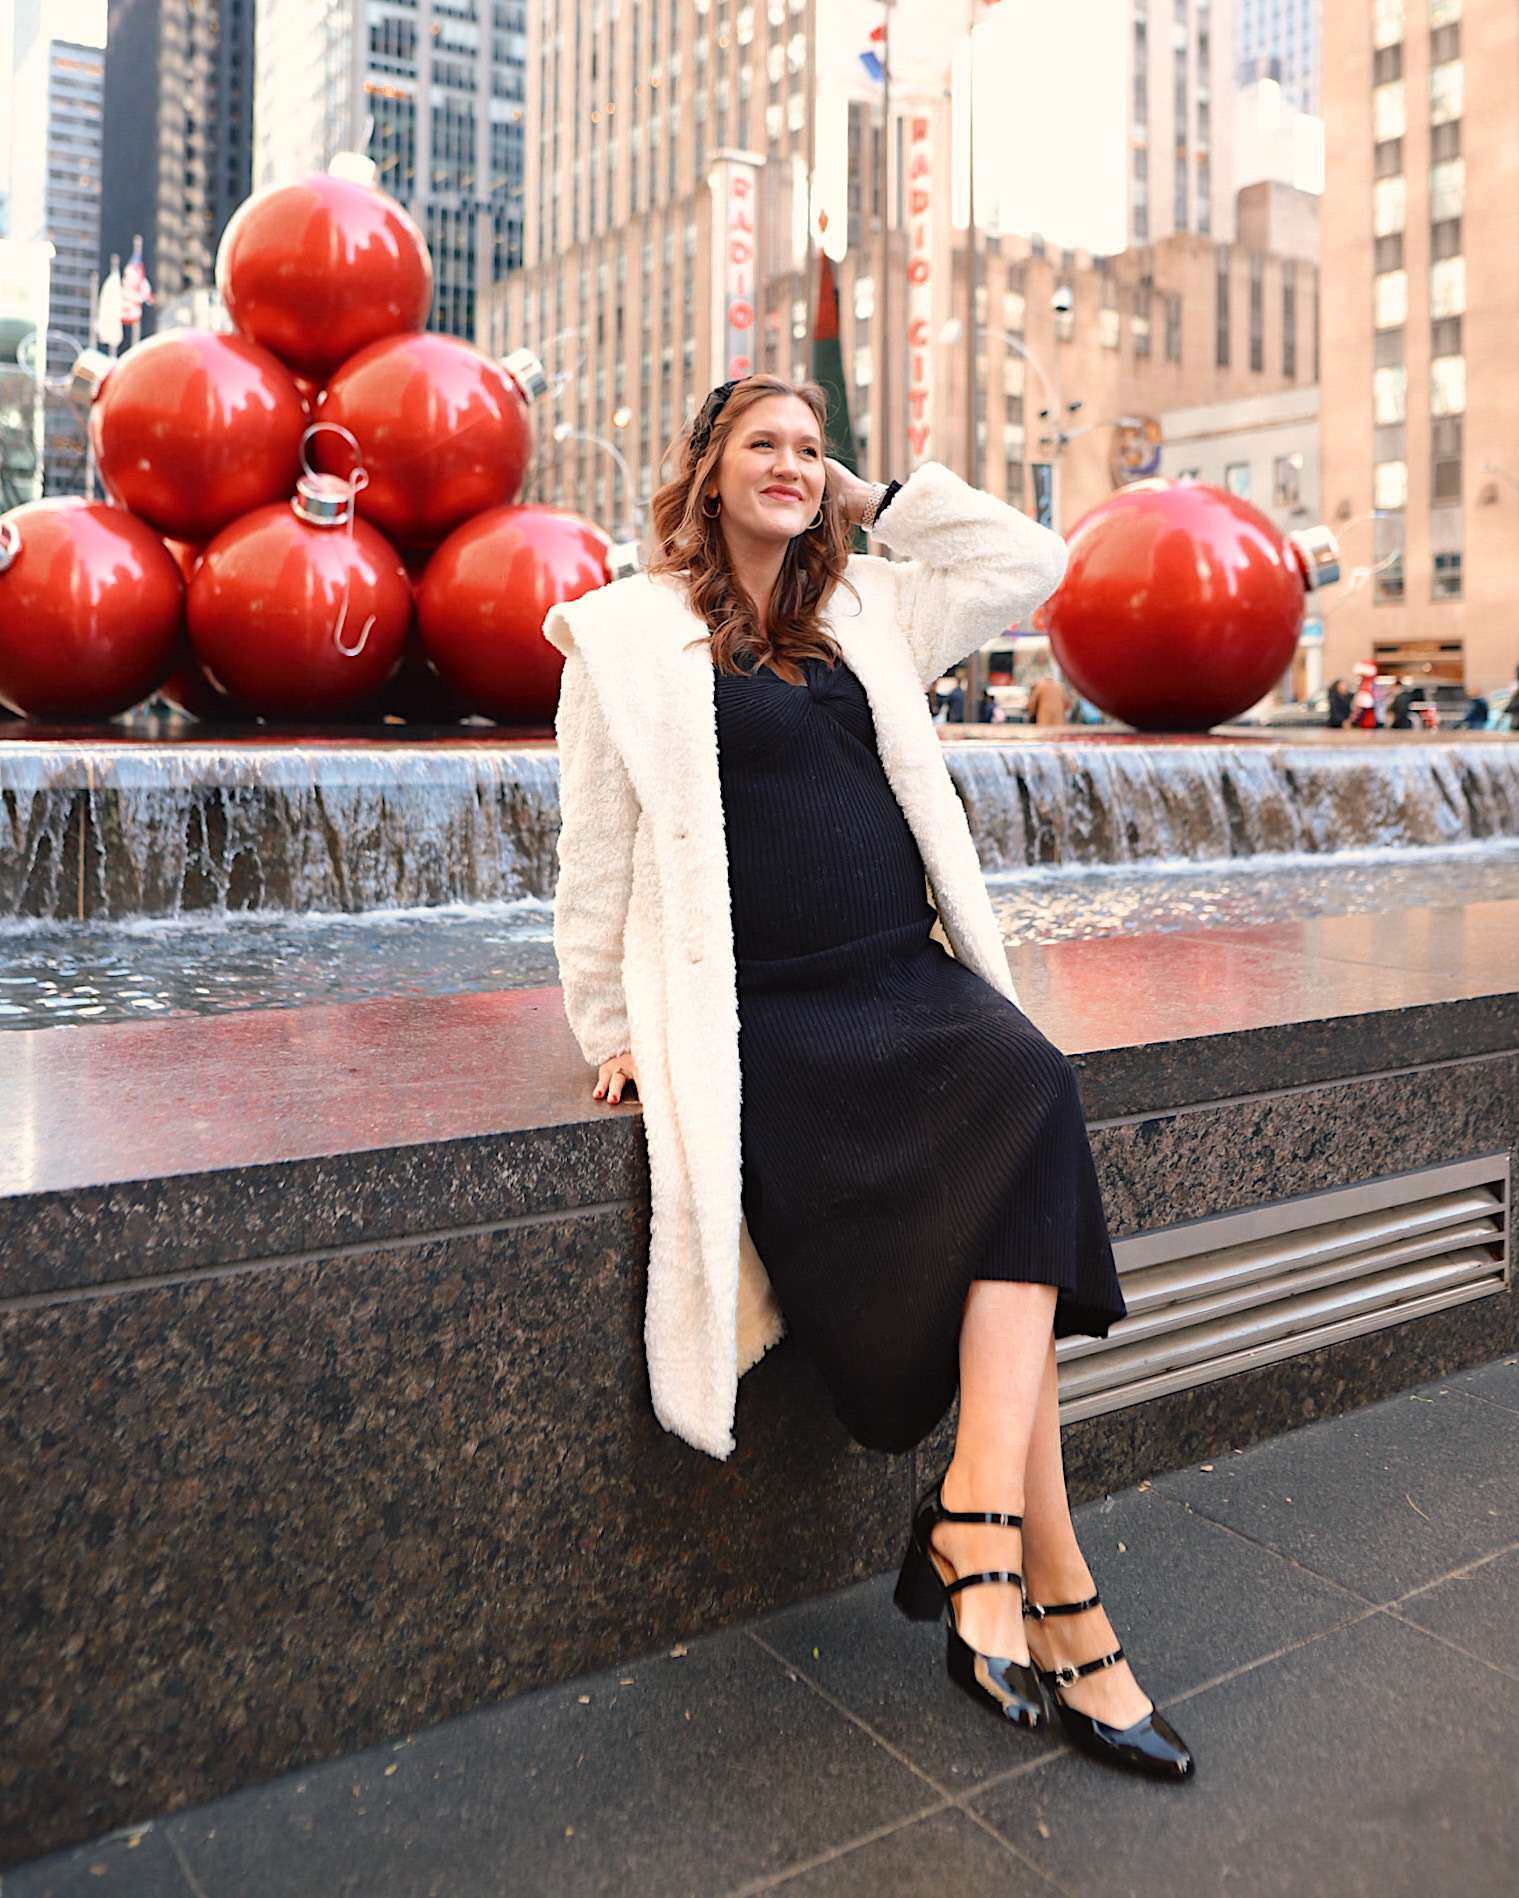 Anna in front of large red ornaments on 5th Avenue in New York City.